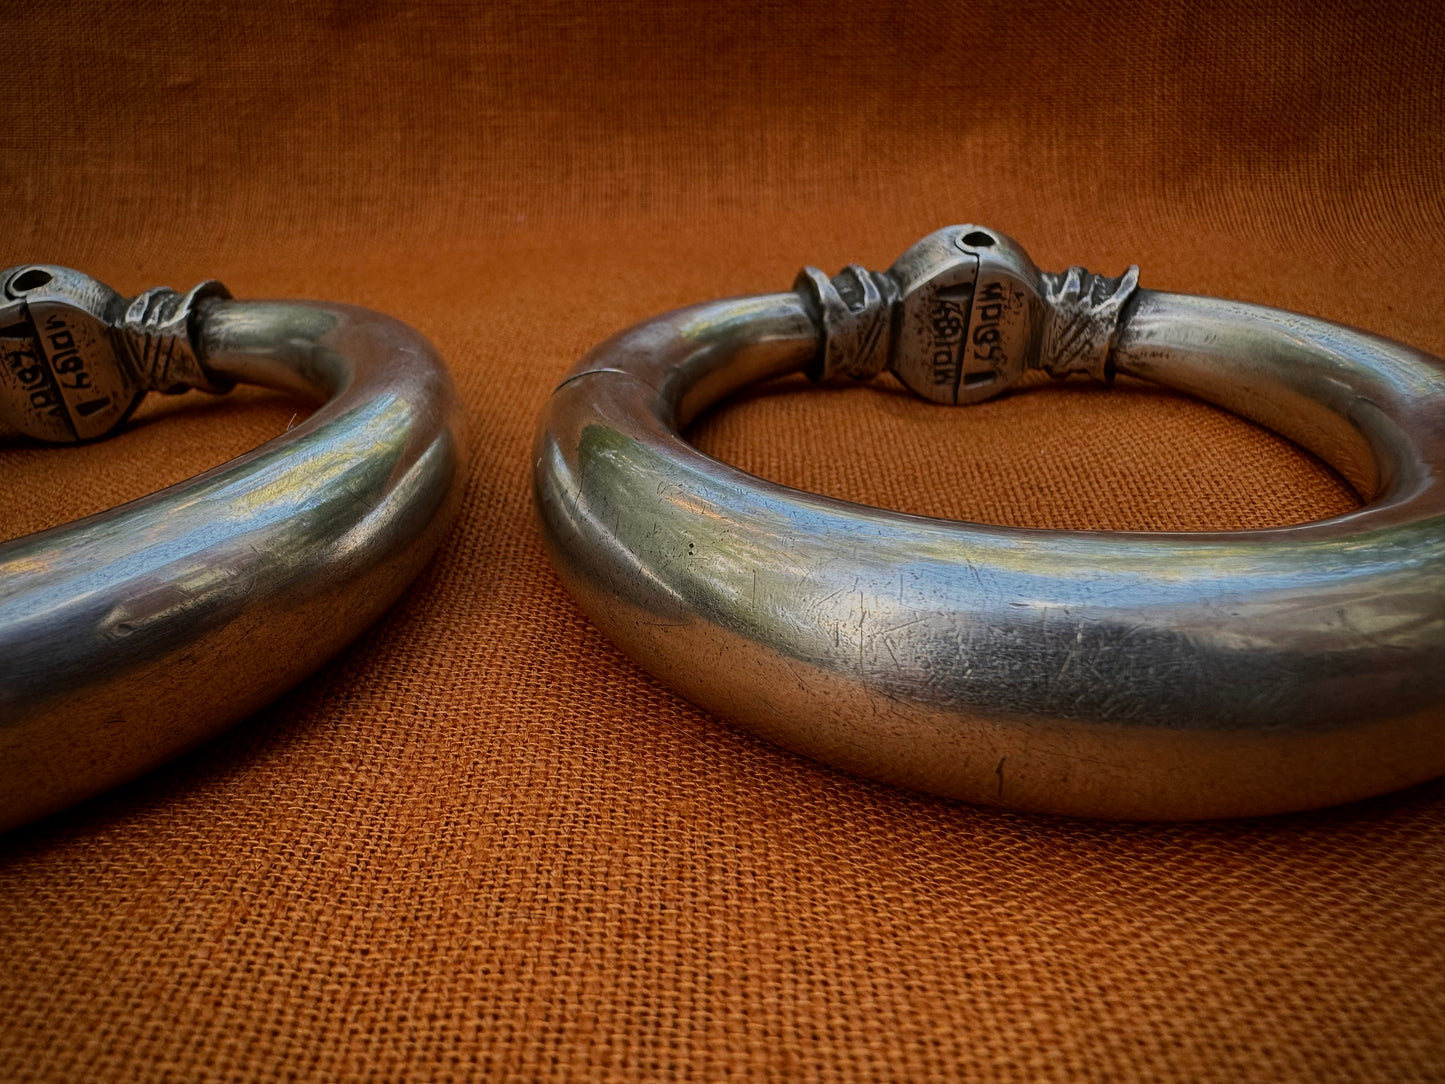 Antique silver bangles from Rajasthan